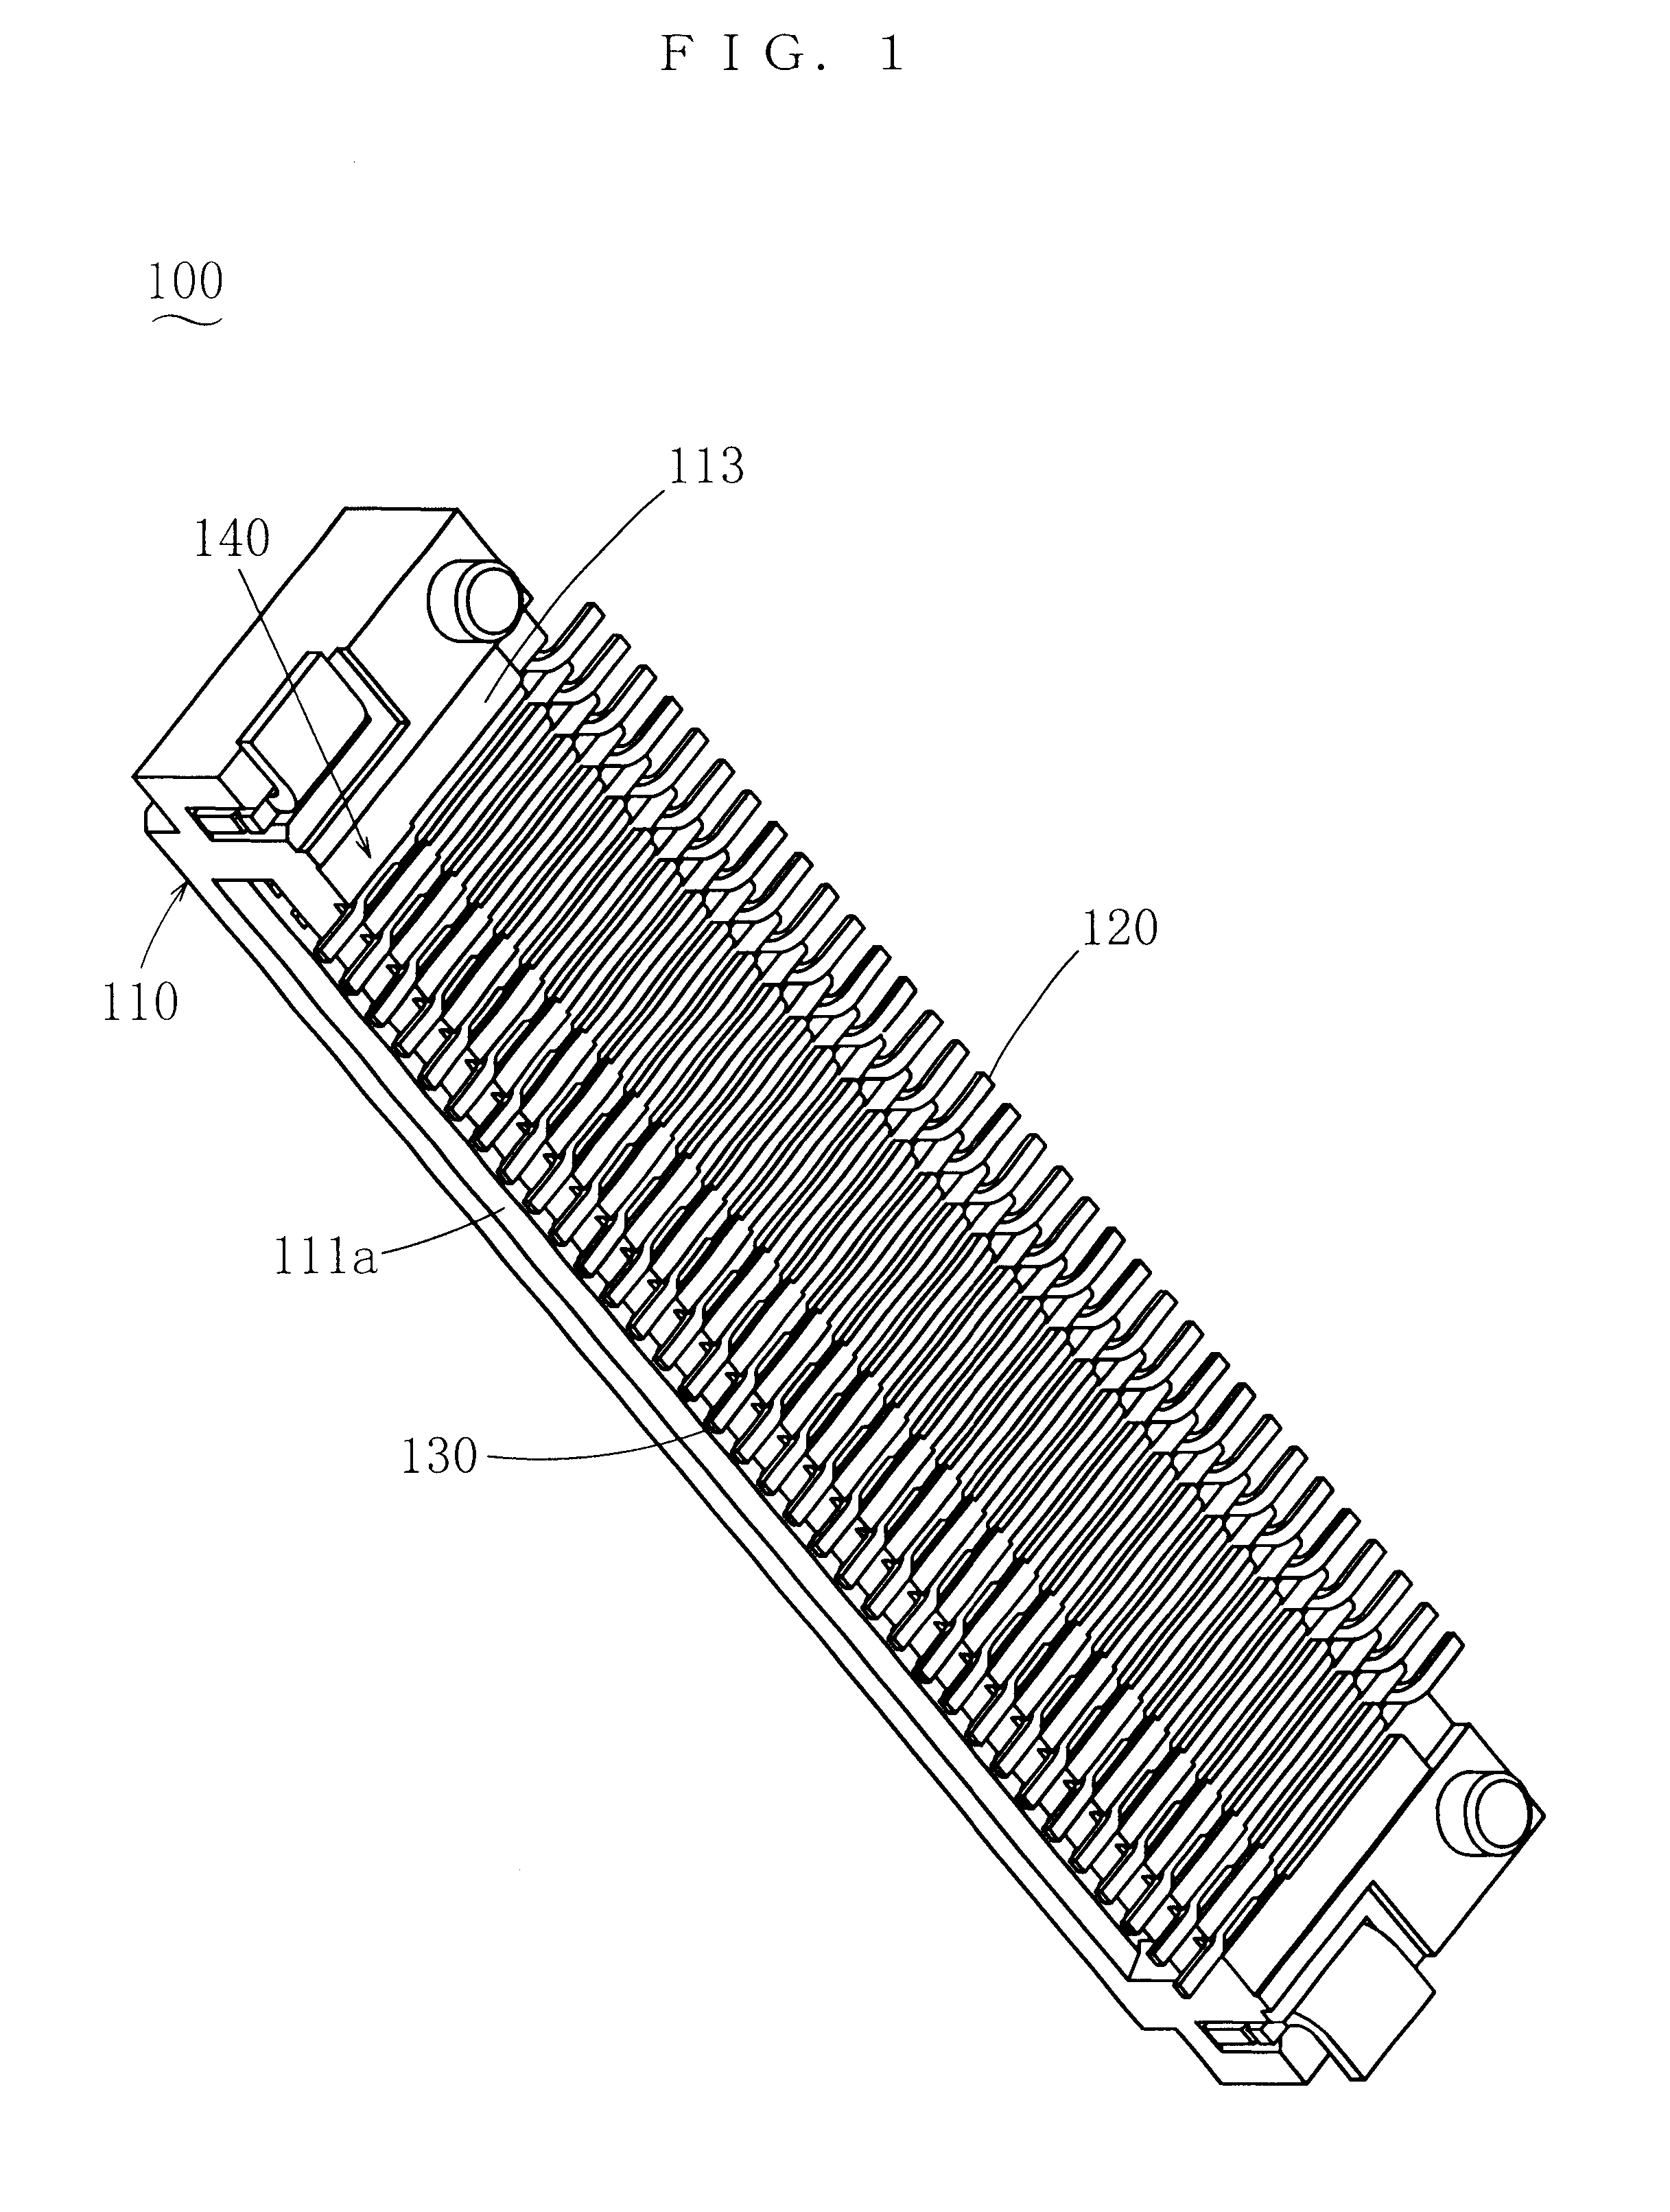 Horizontal electric connector